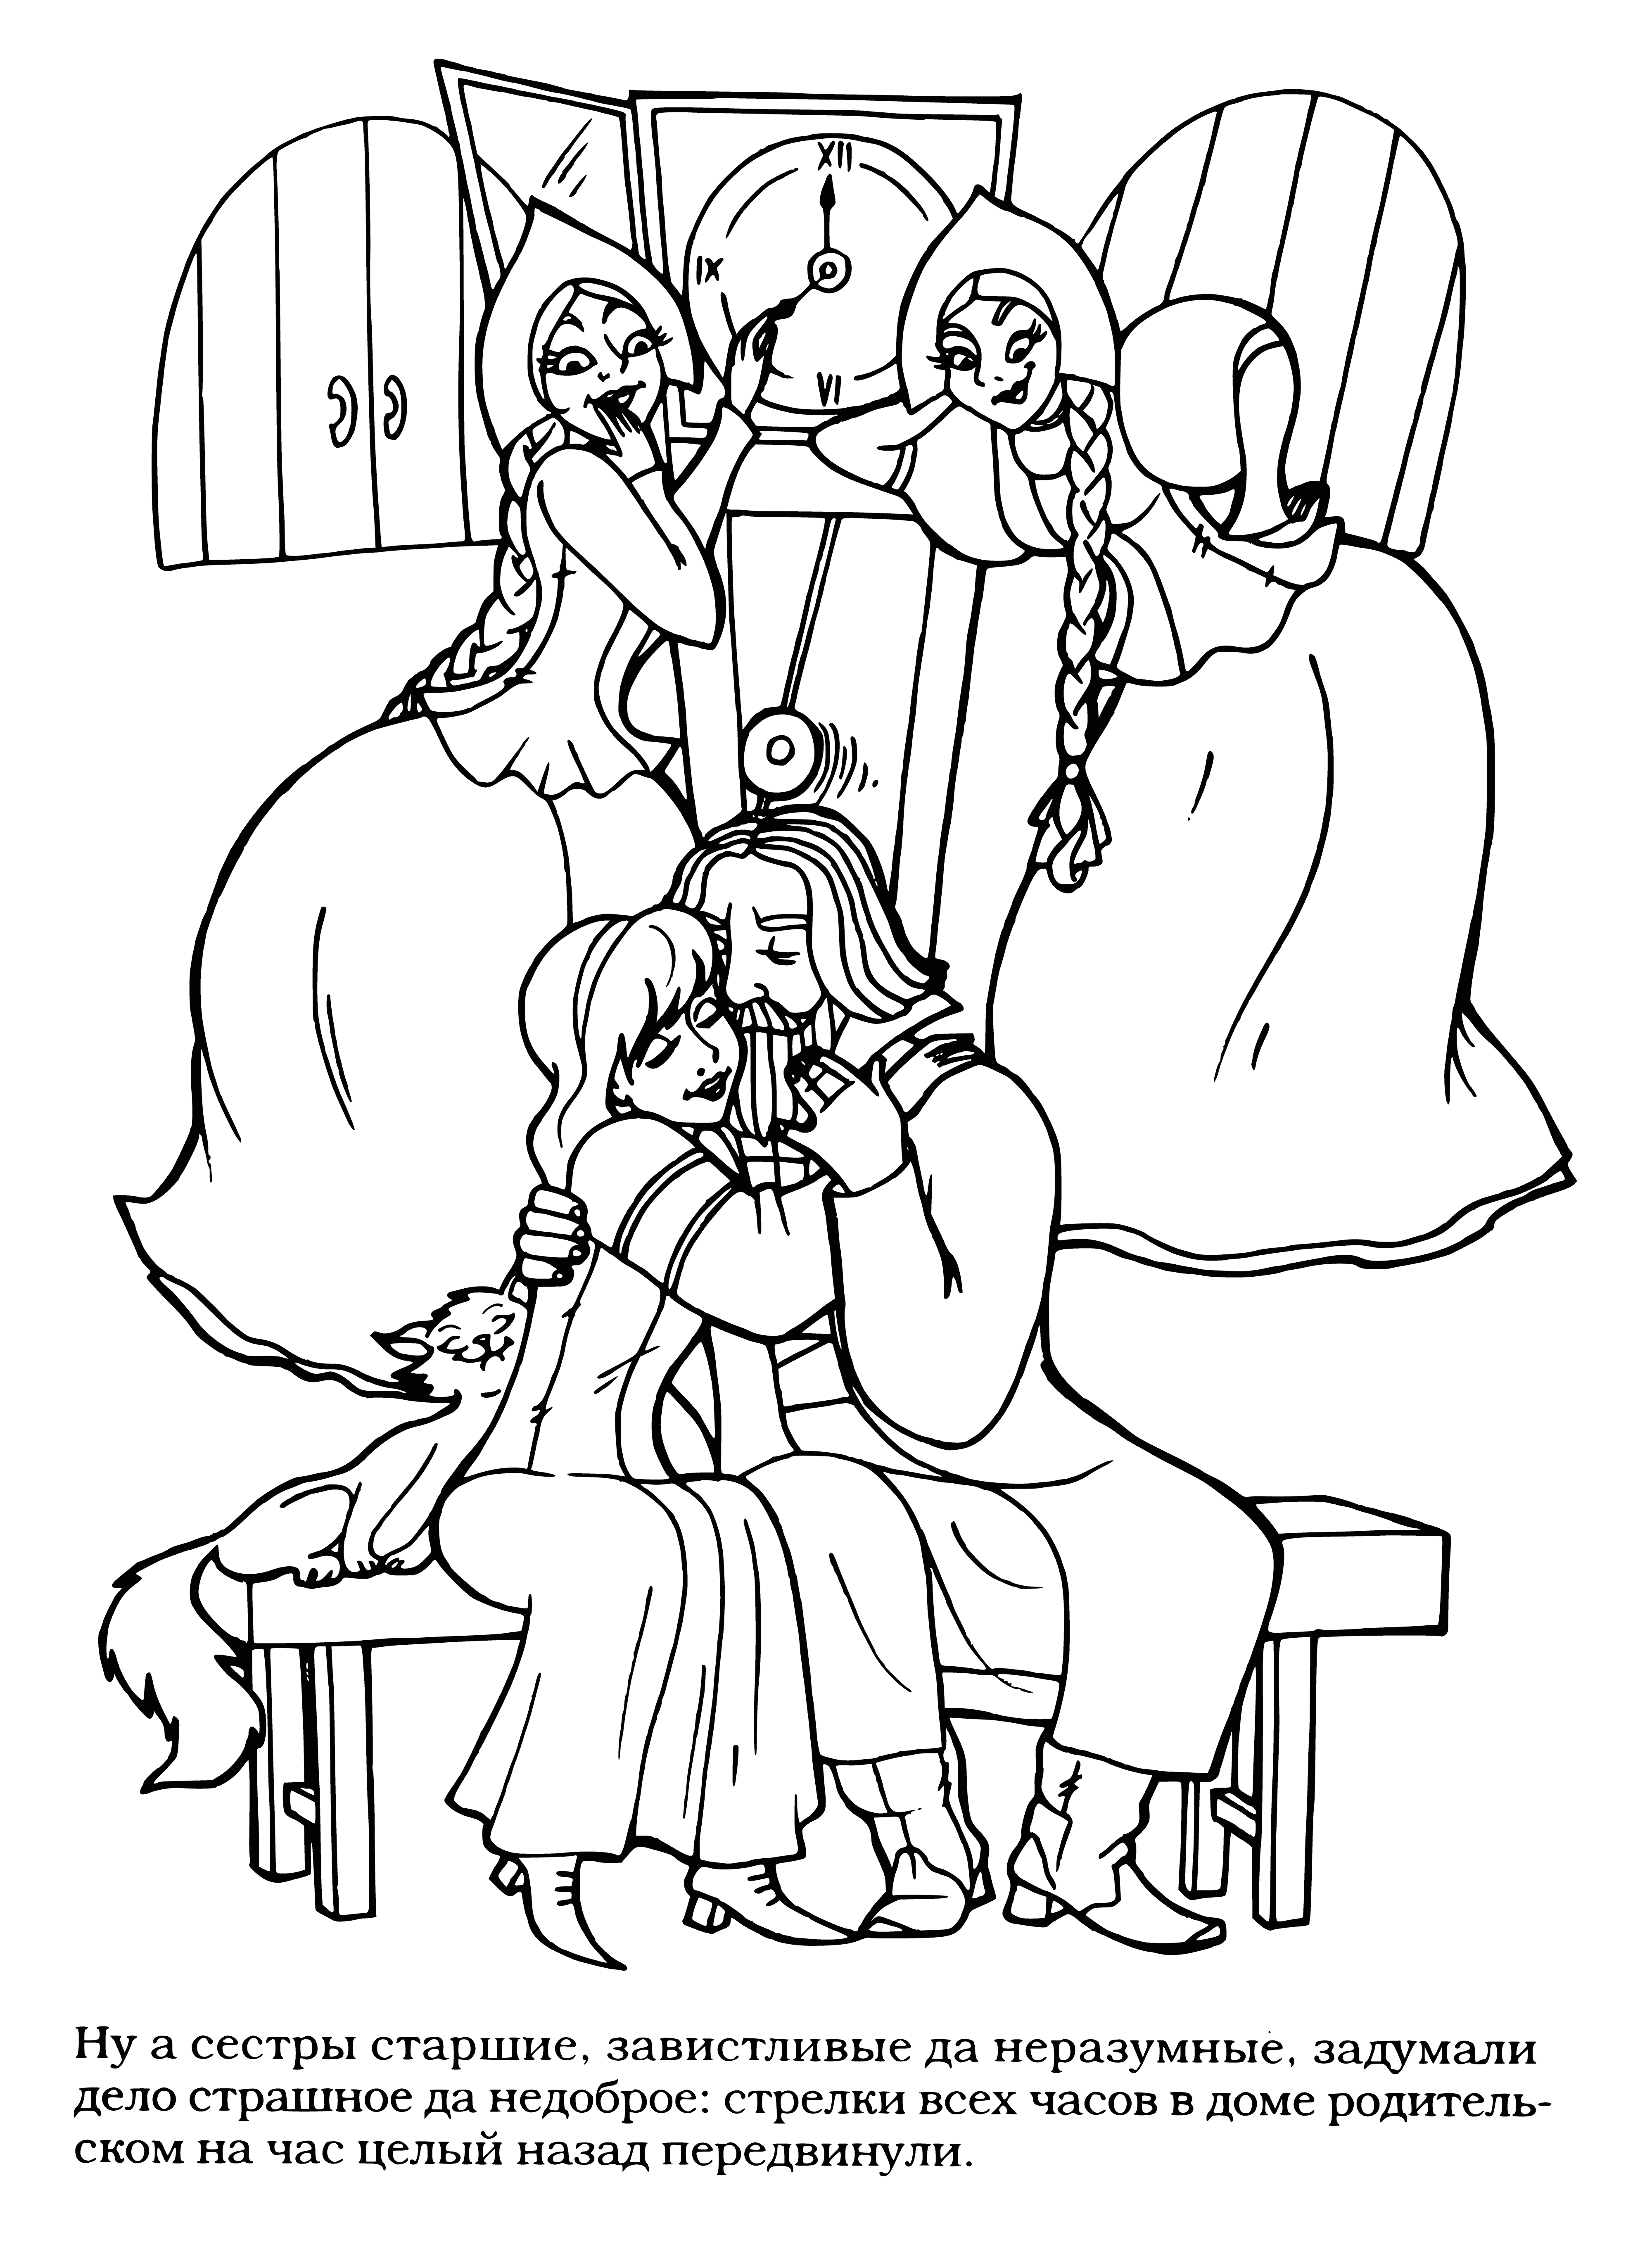 Mischievous sisters coloring page